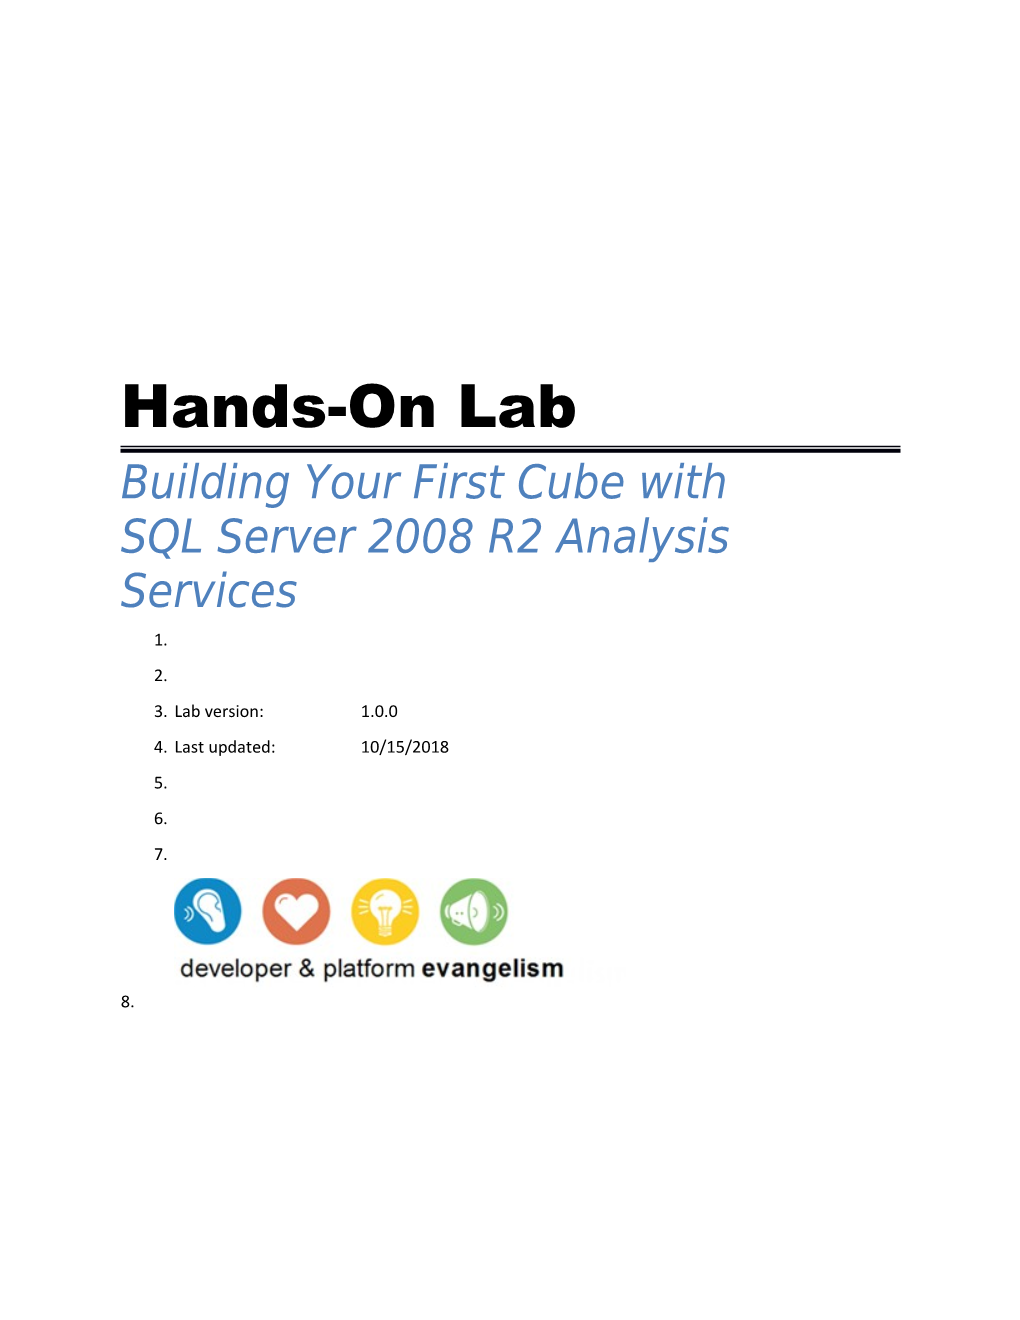 Hands on Lab: Building Your First Cube with SQL Server 2008 R2 Analysis Services